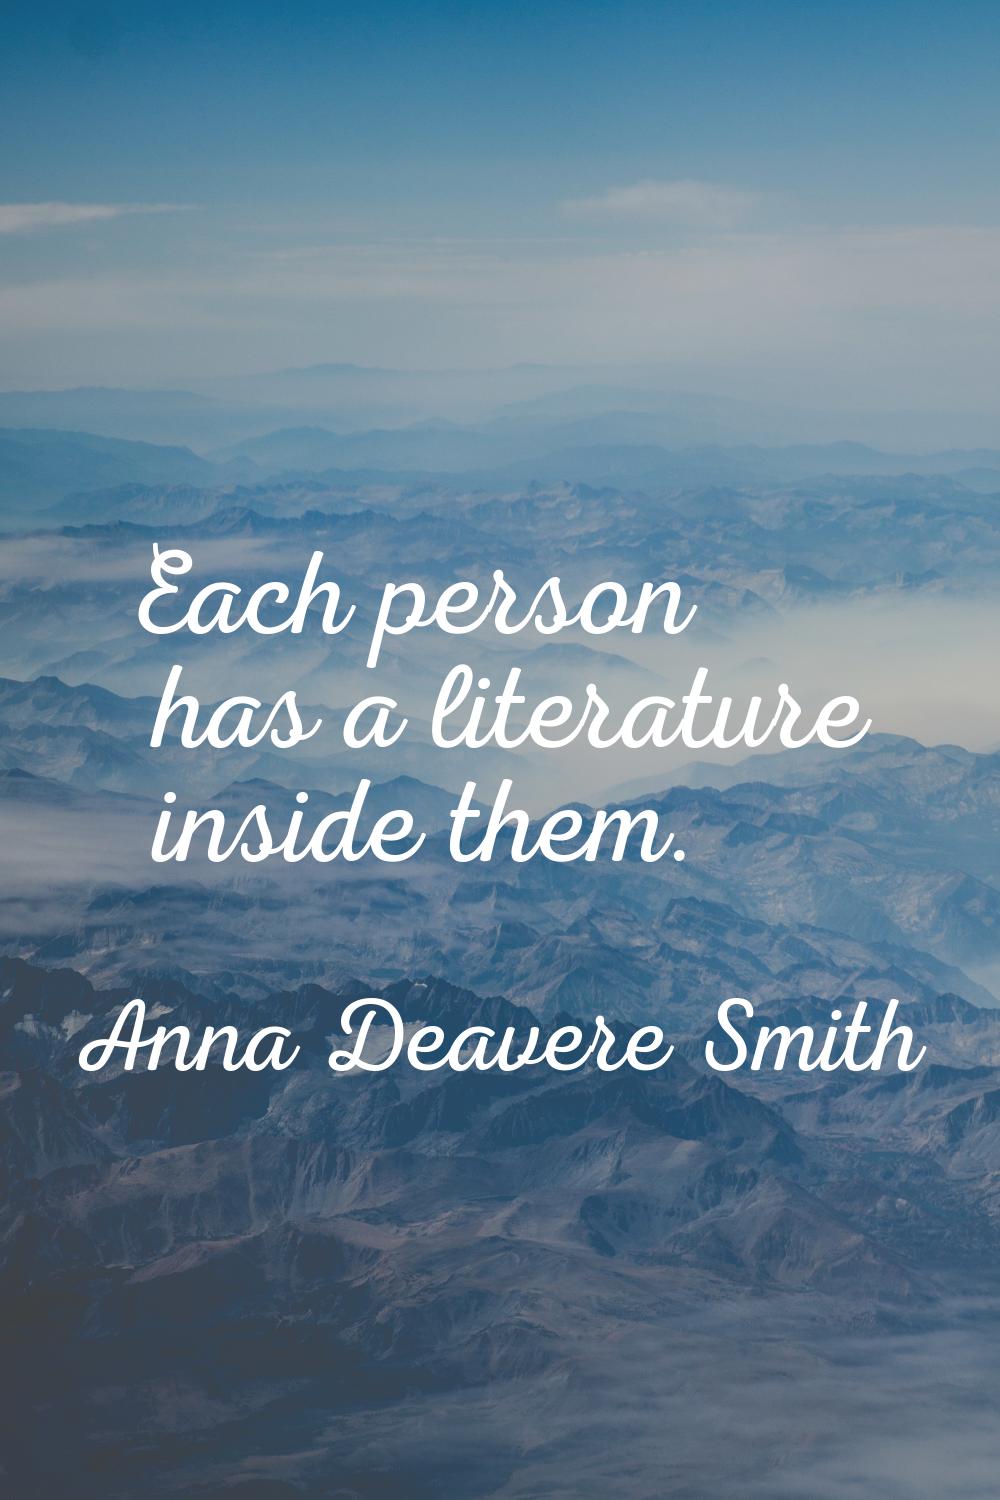 Each person has a literature inside them.